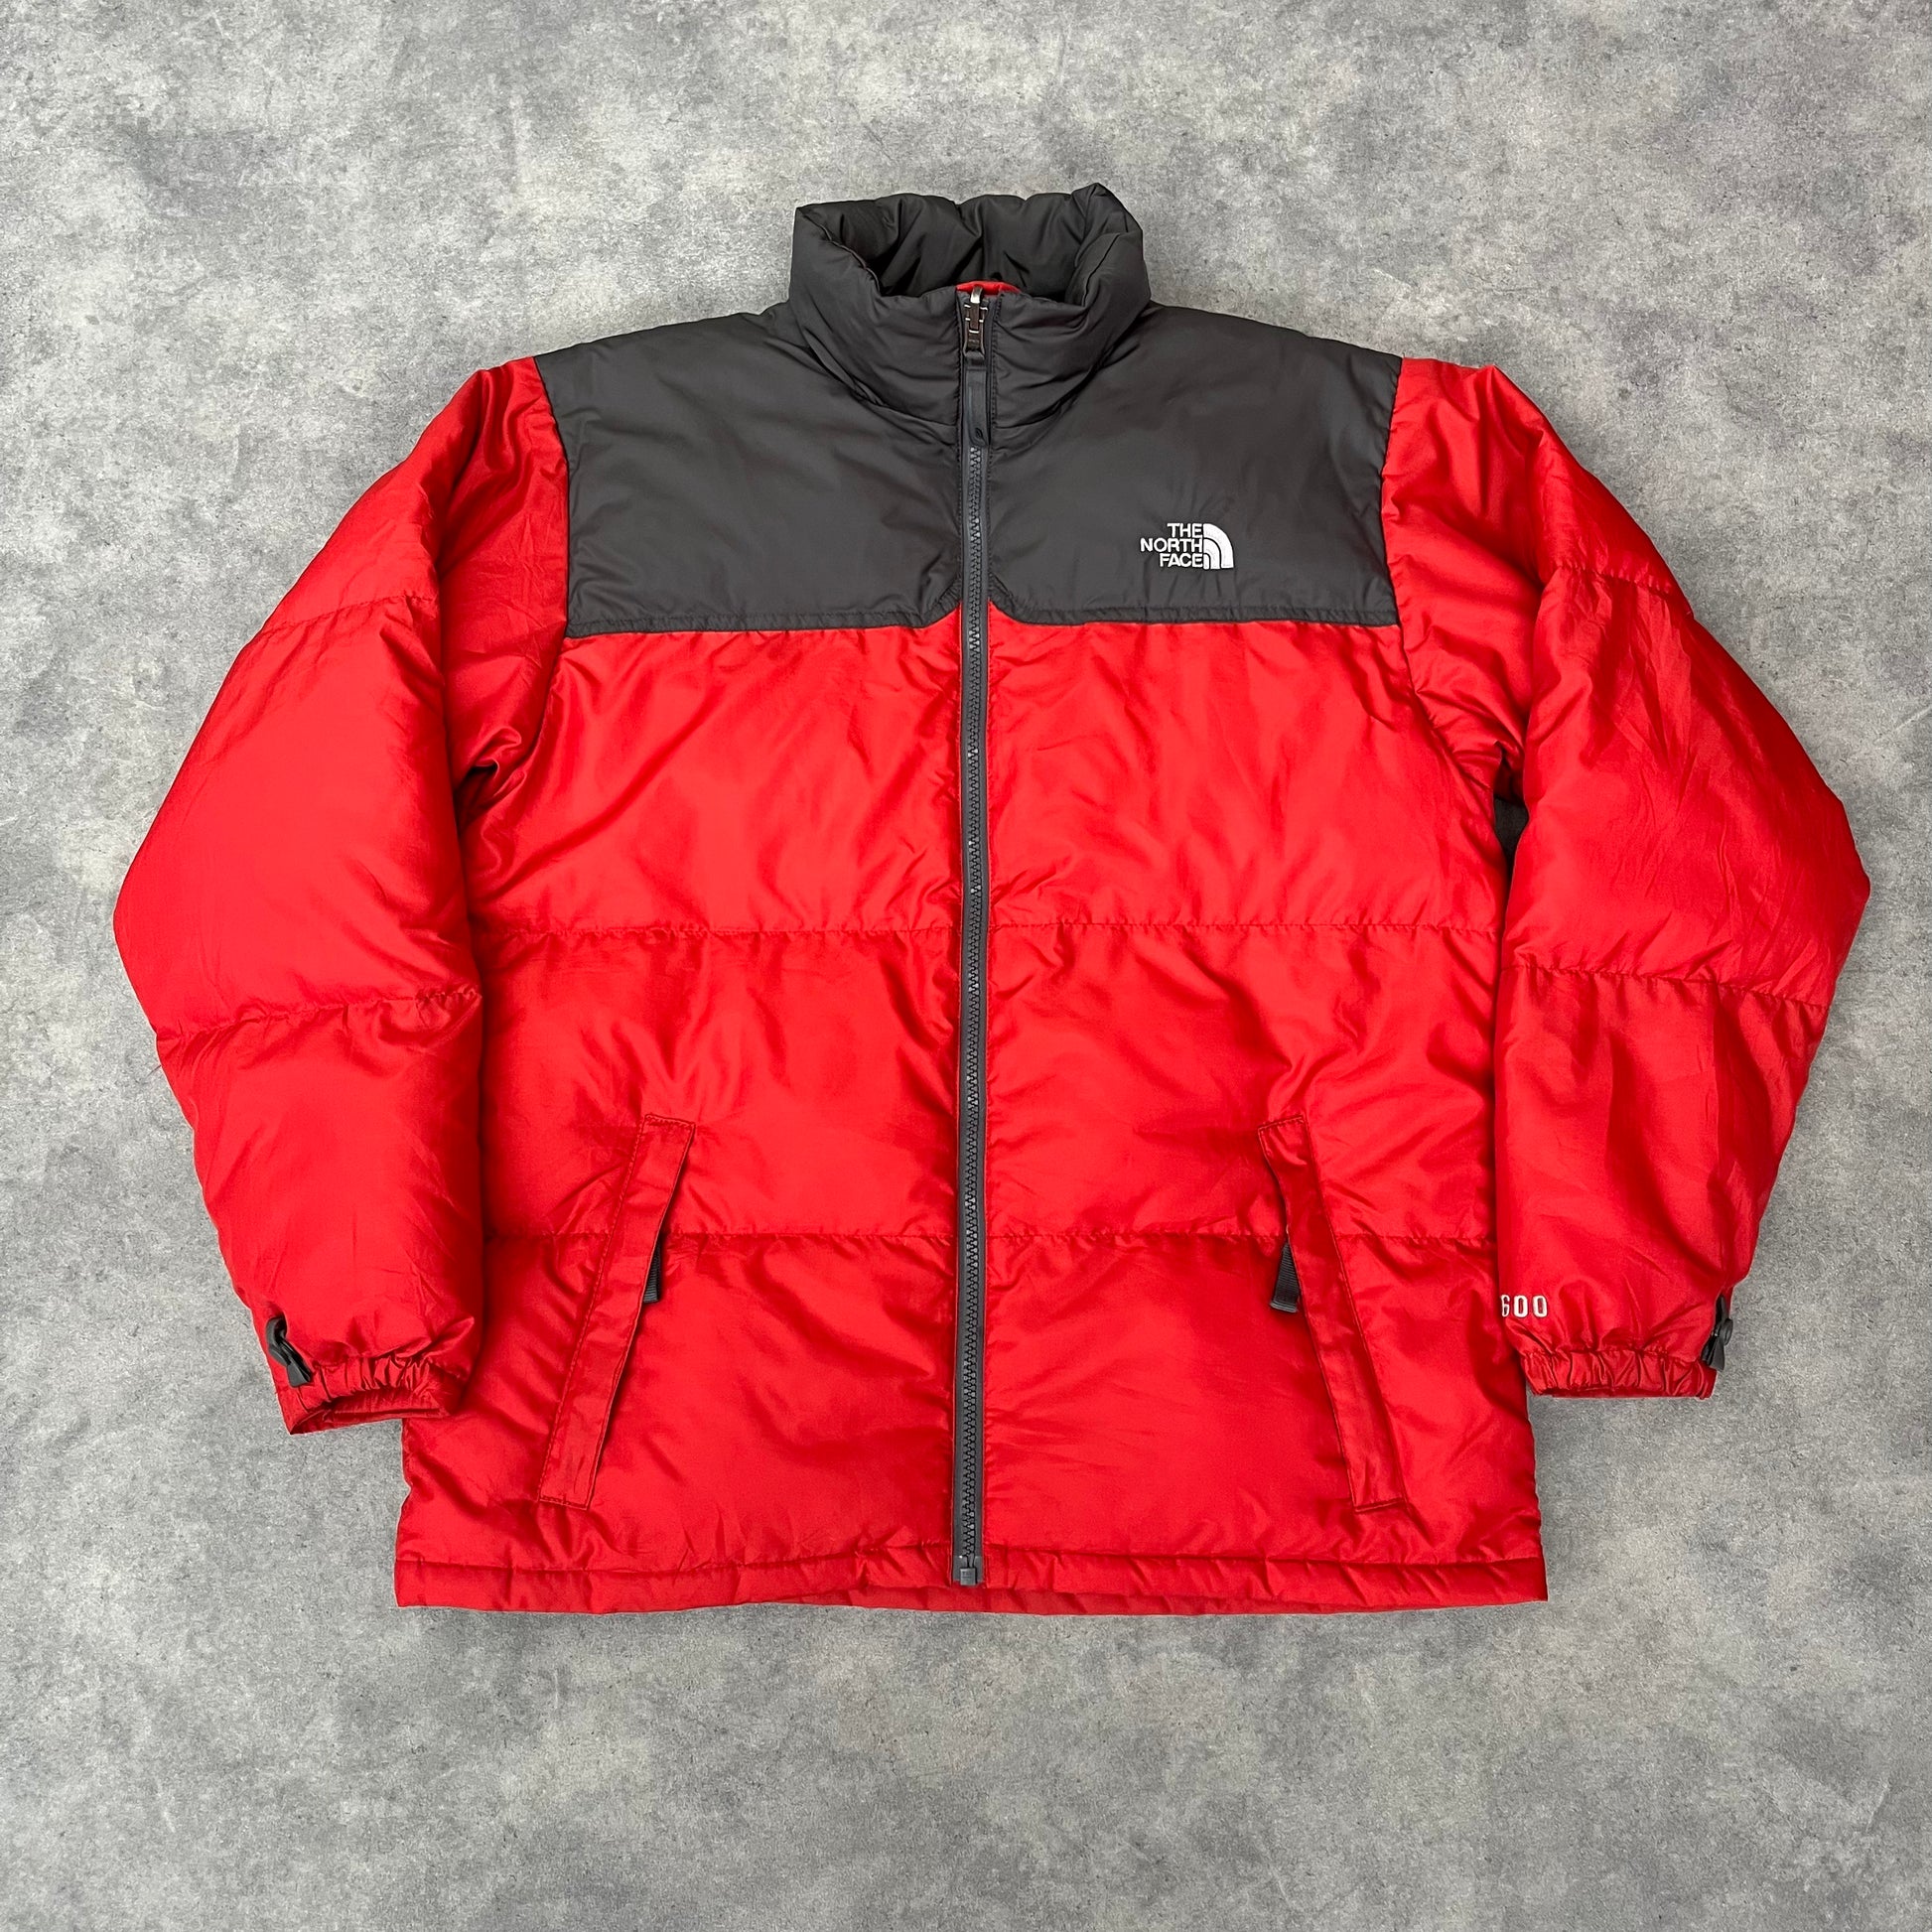 Doudoune The North Face 600 – Wefrip Vintage